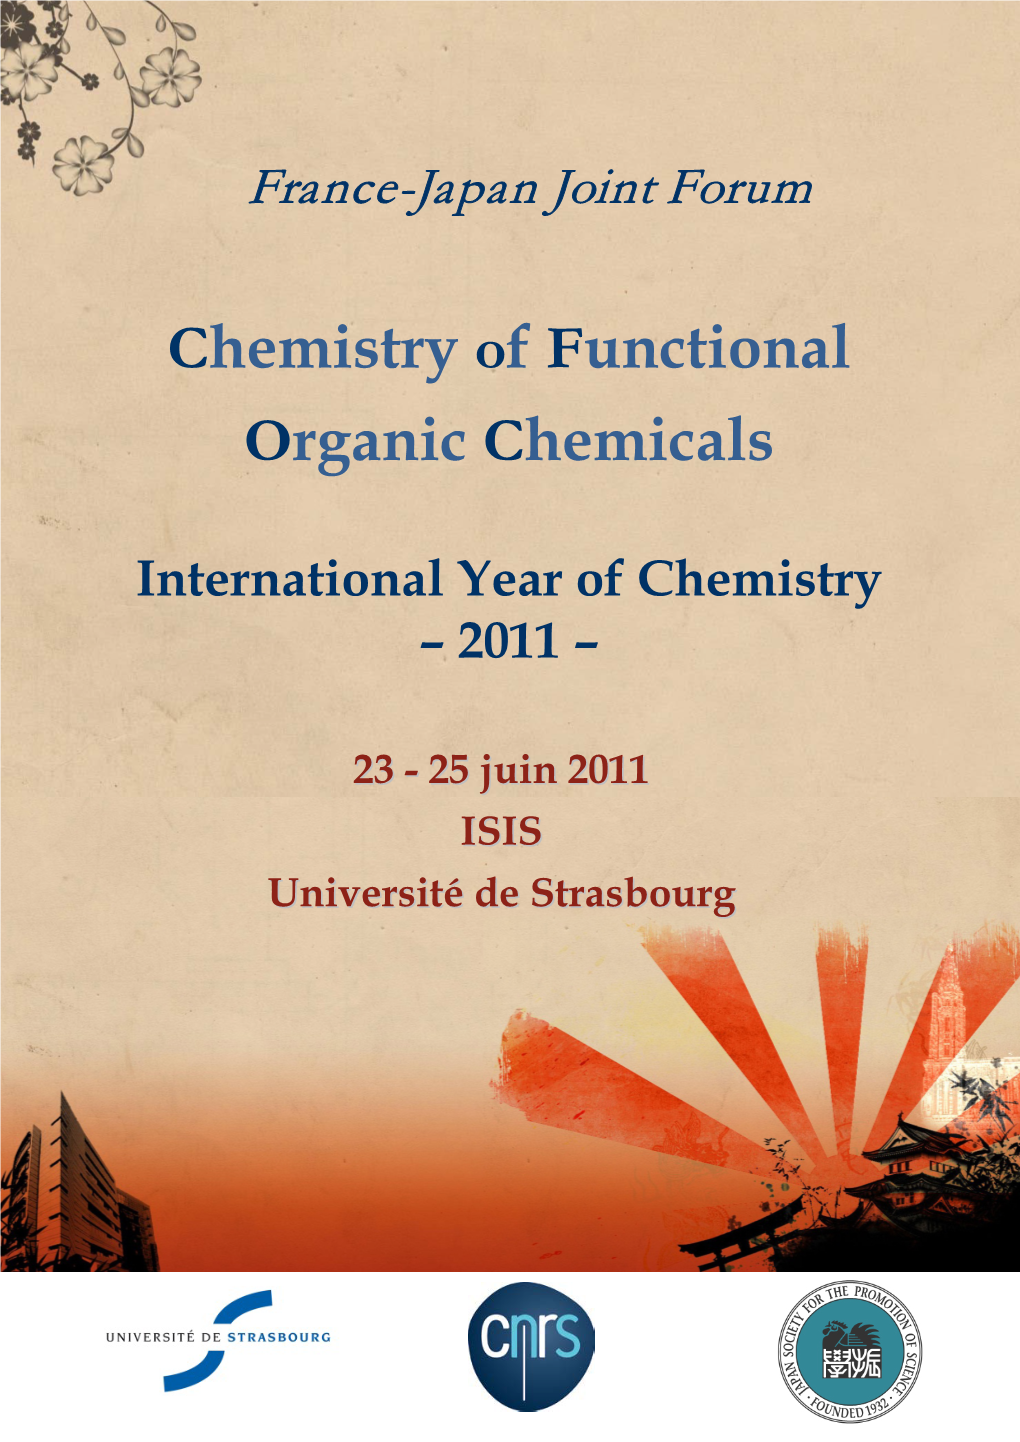 Chemistry of Functional Organic Chemicals